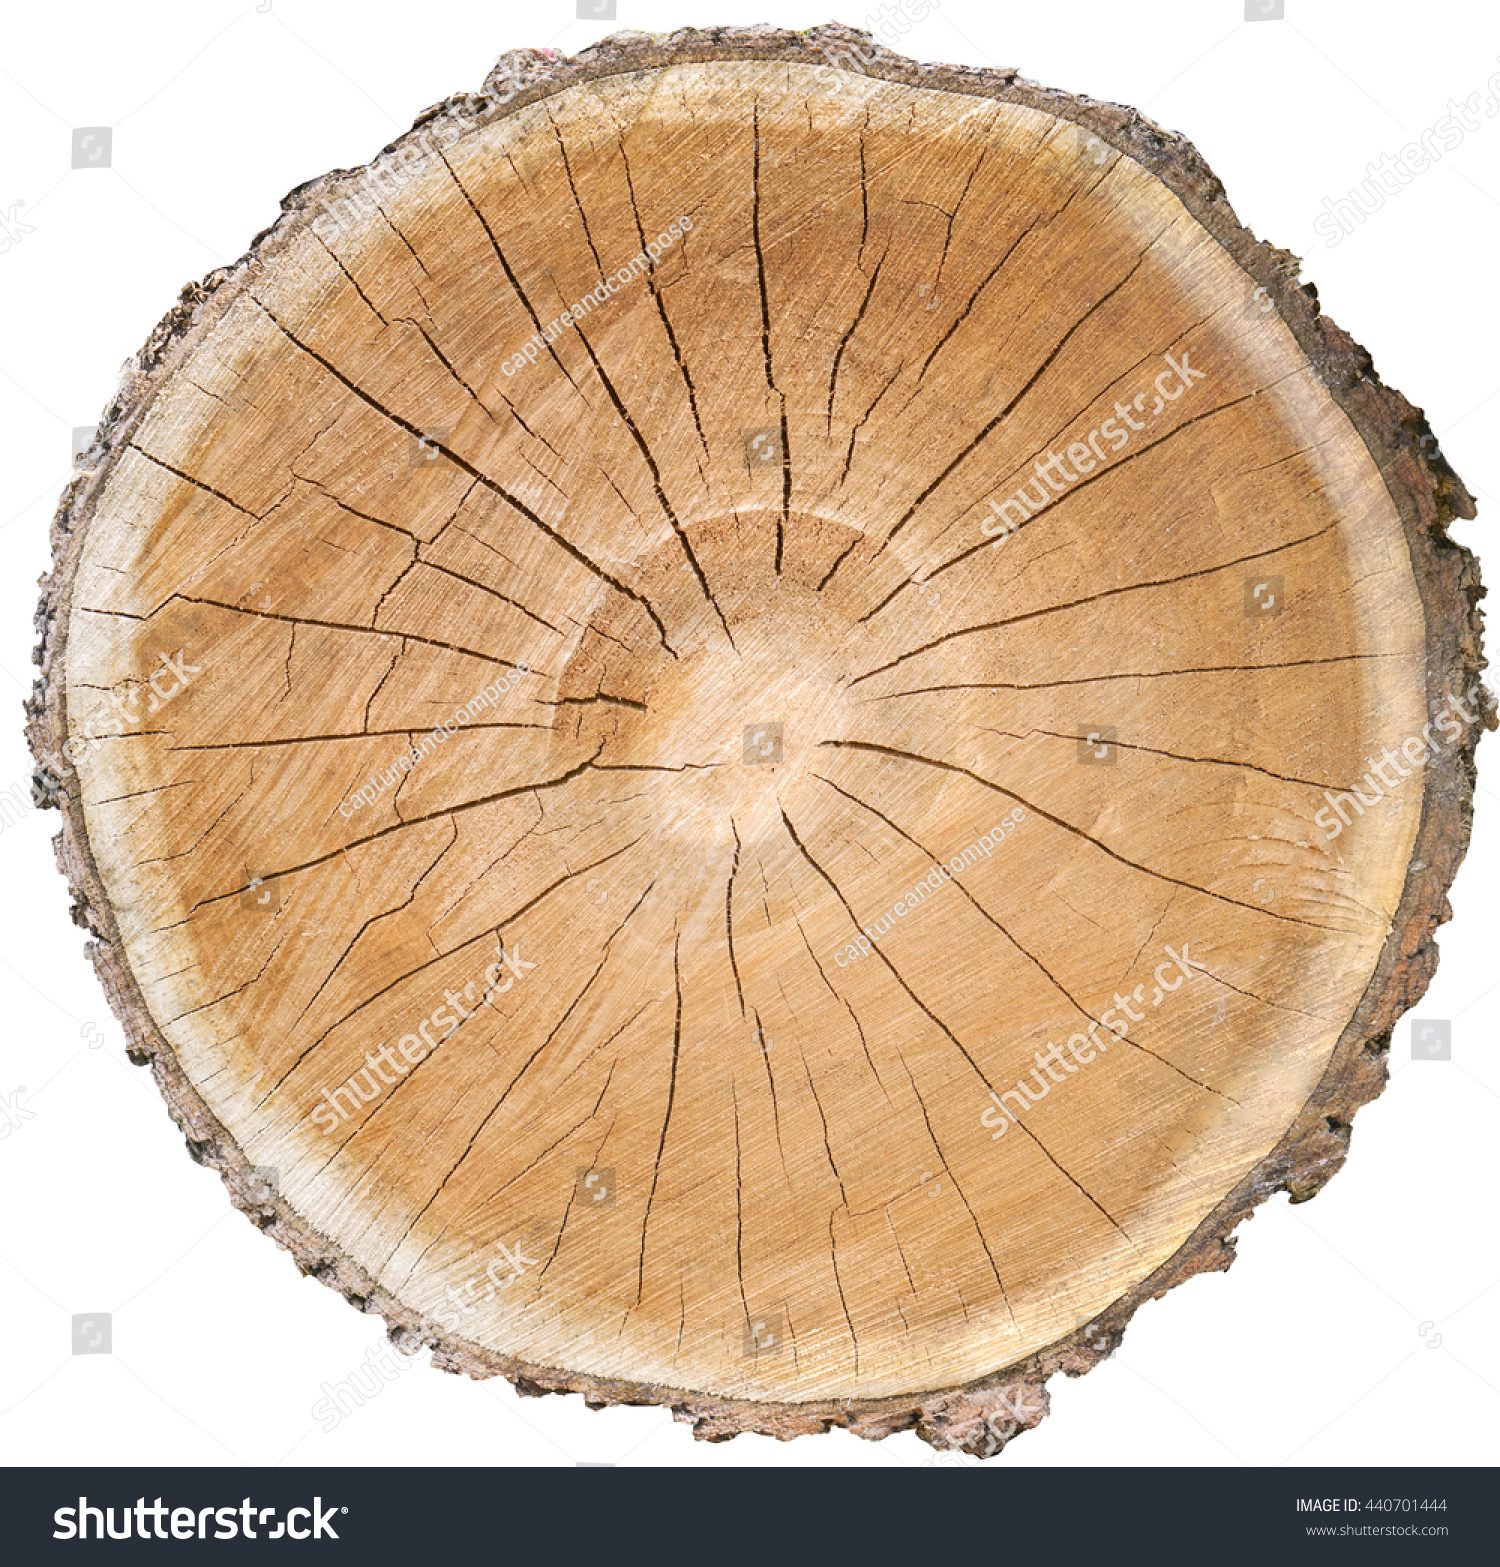 Royalty-free Three wood slice cross section with… #440701444 Stock ...